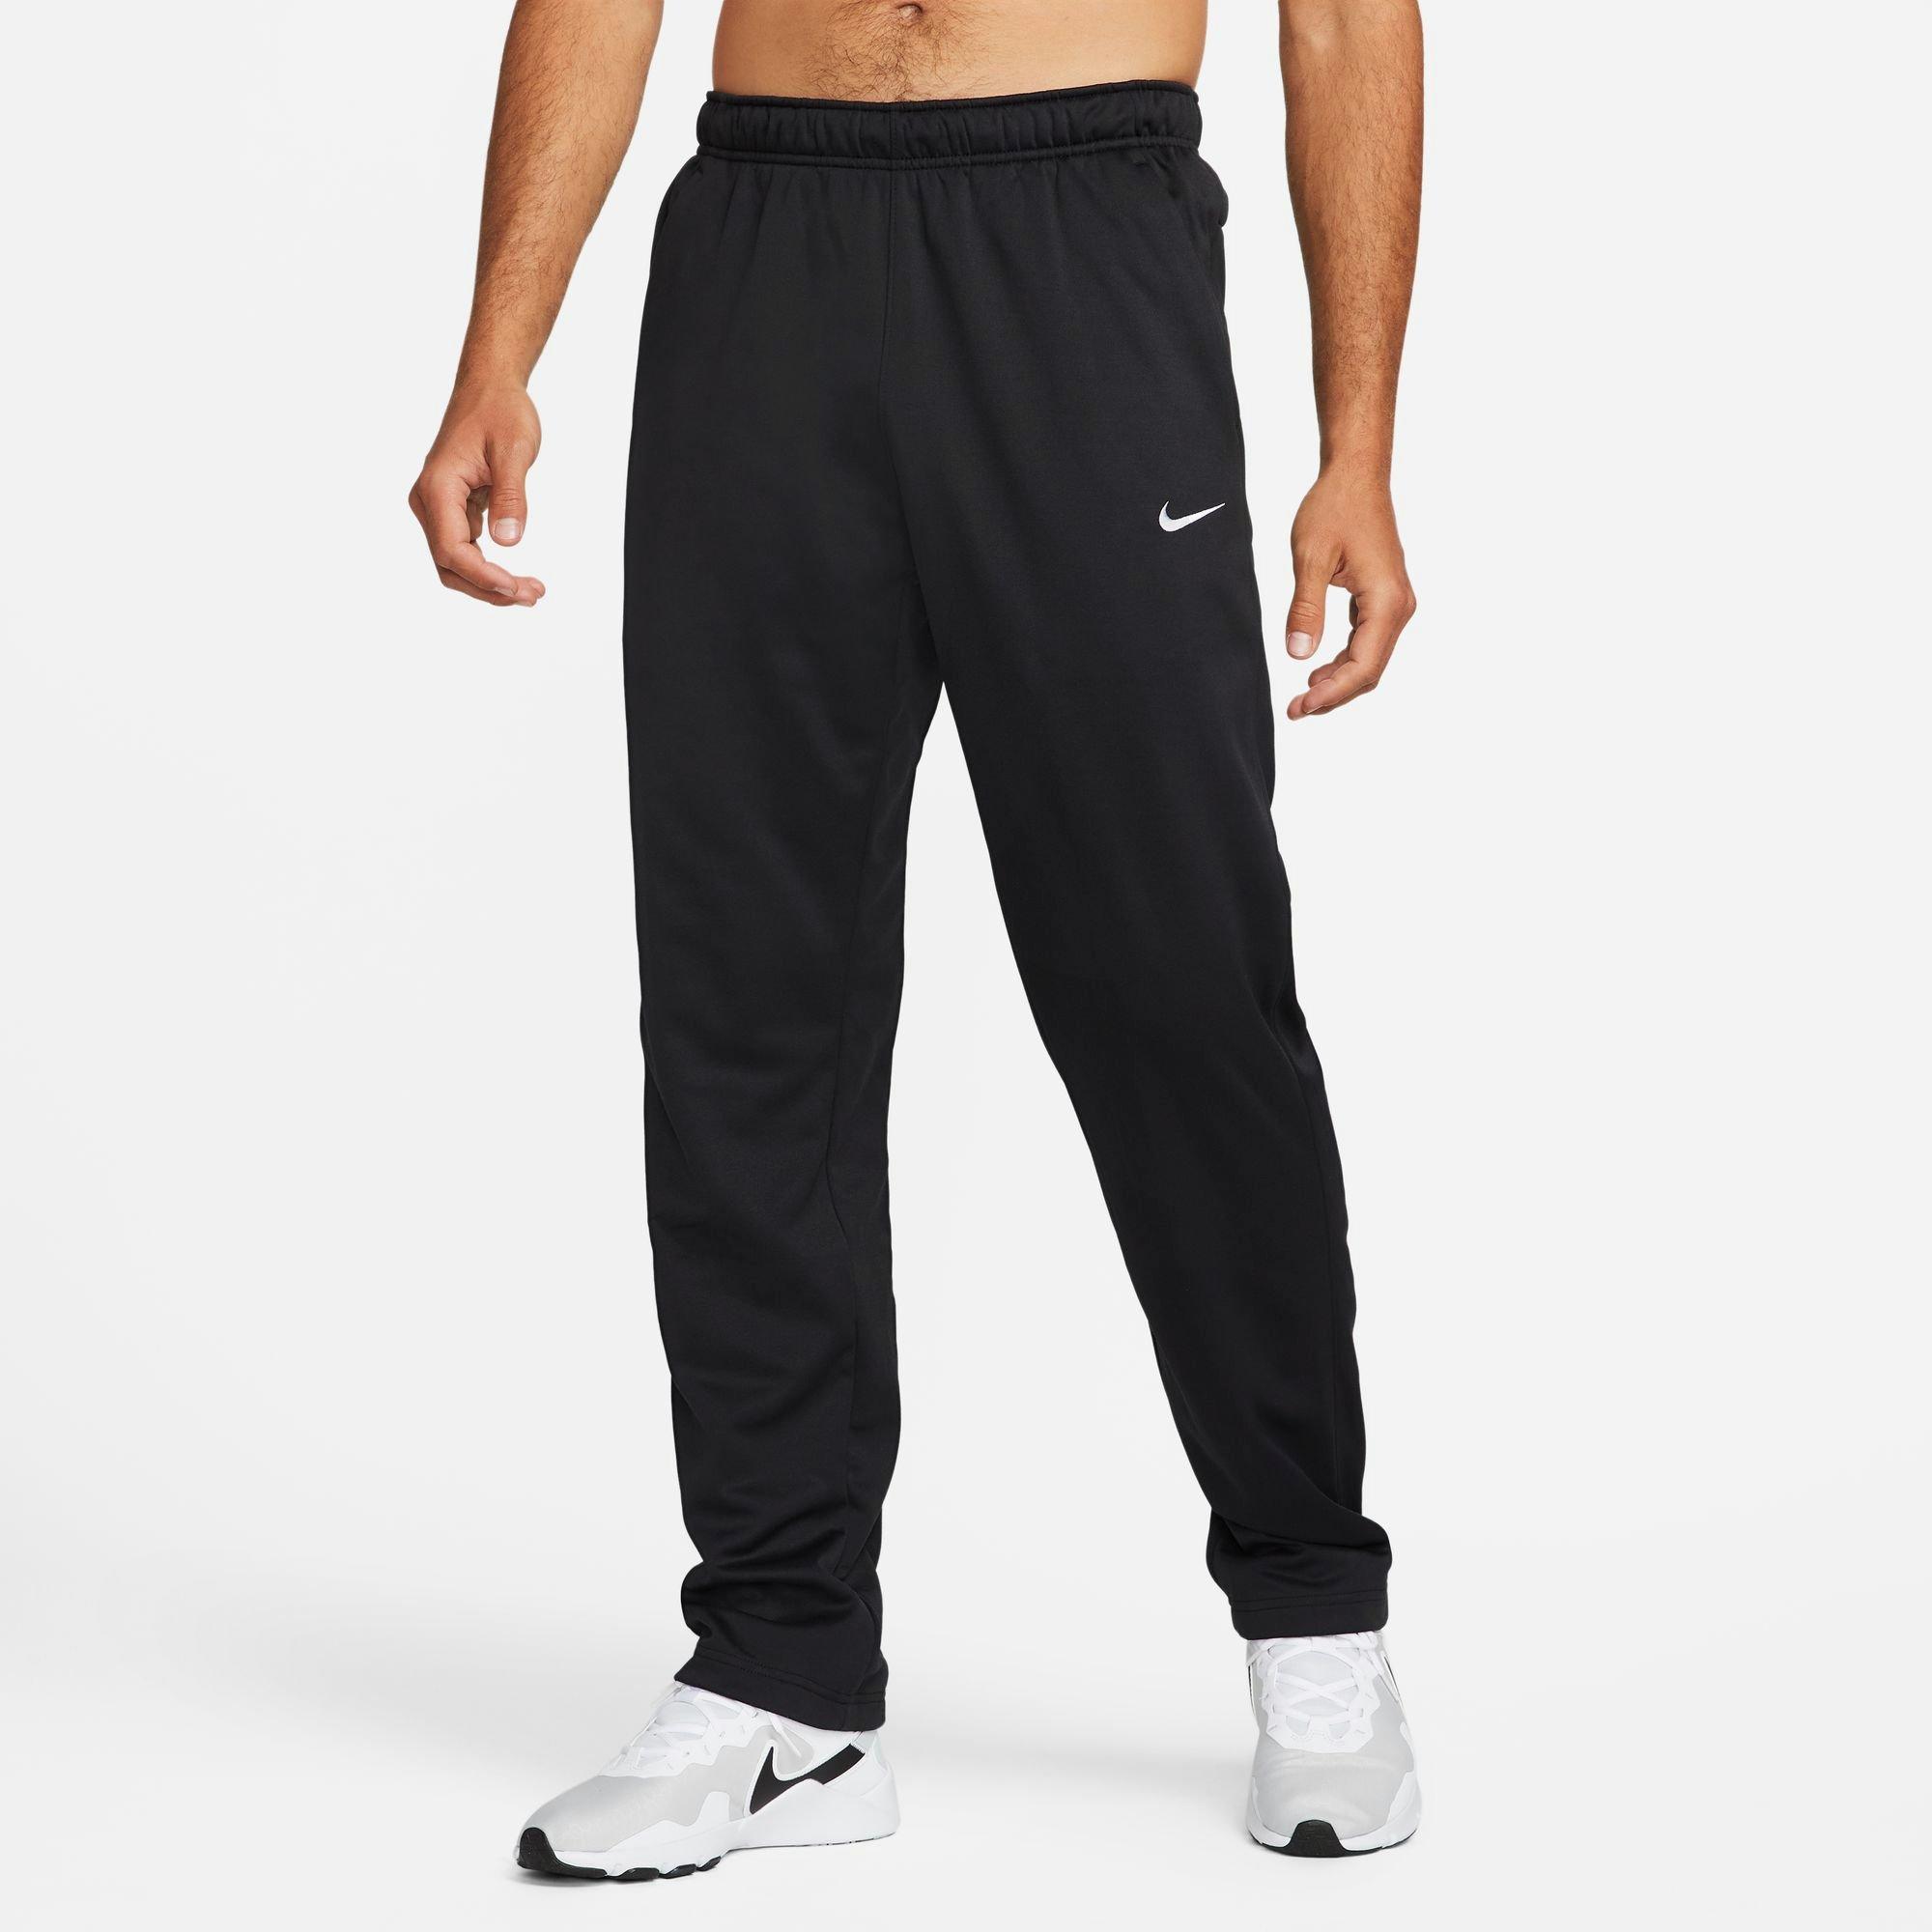 Men's Therma-Fit Pant from Nike